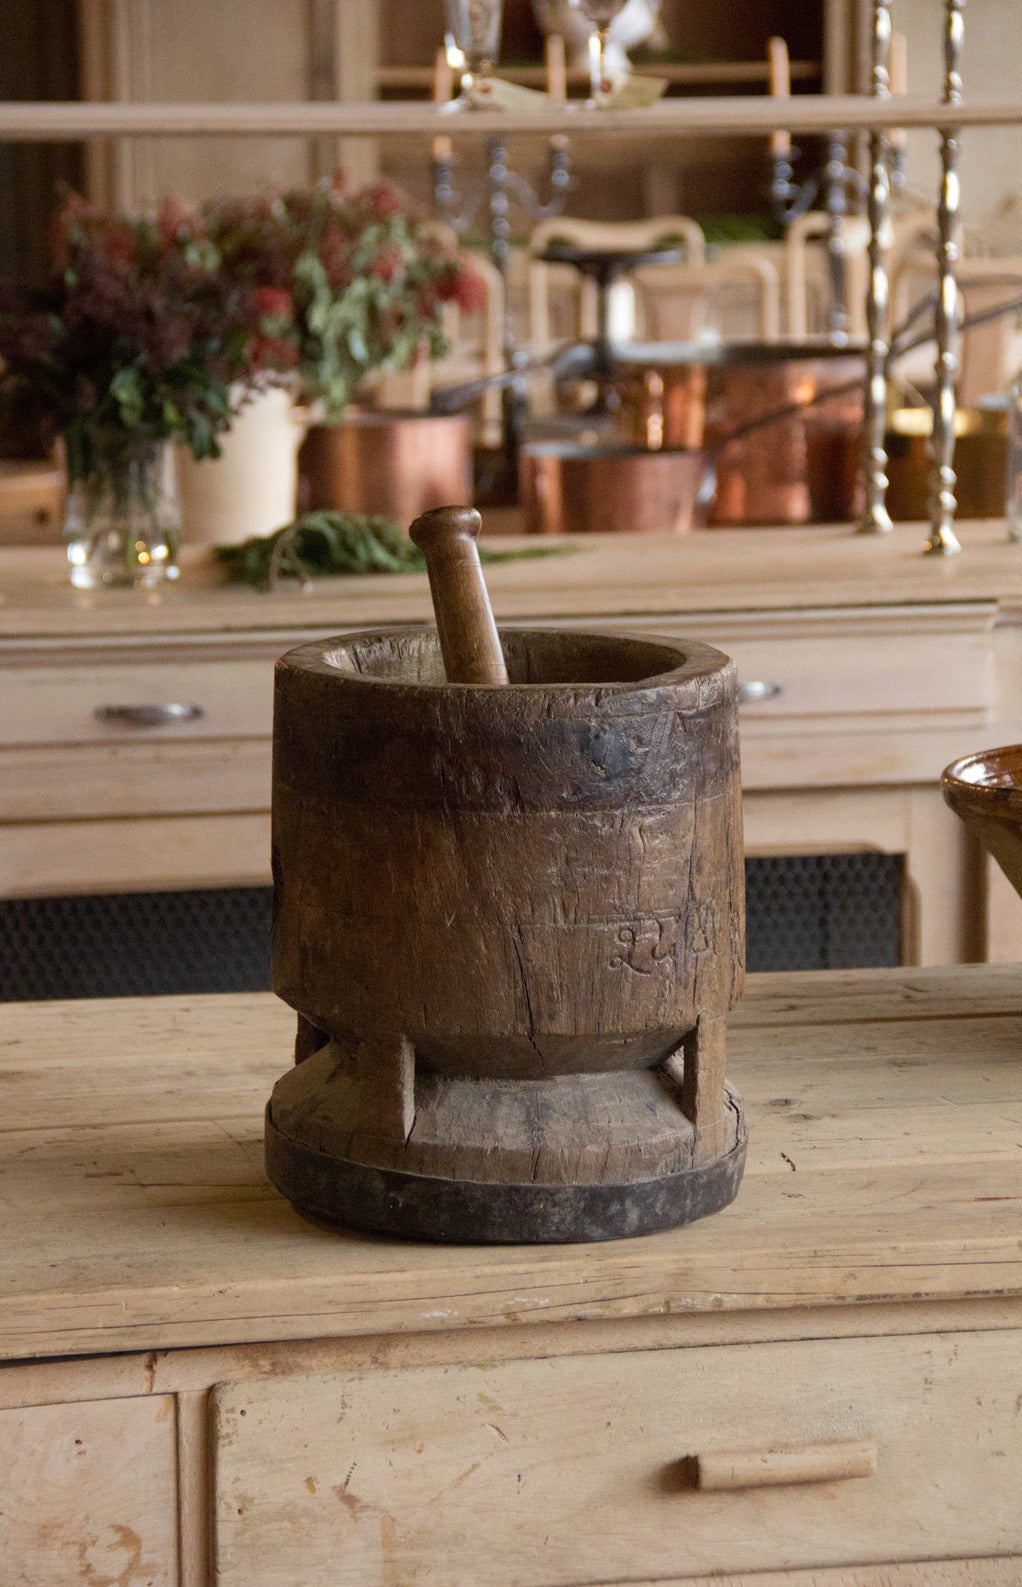 Beautiful and gnarly antique wooden mortar and pestle.